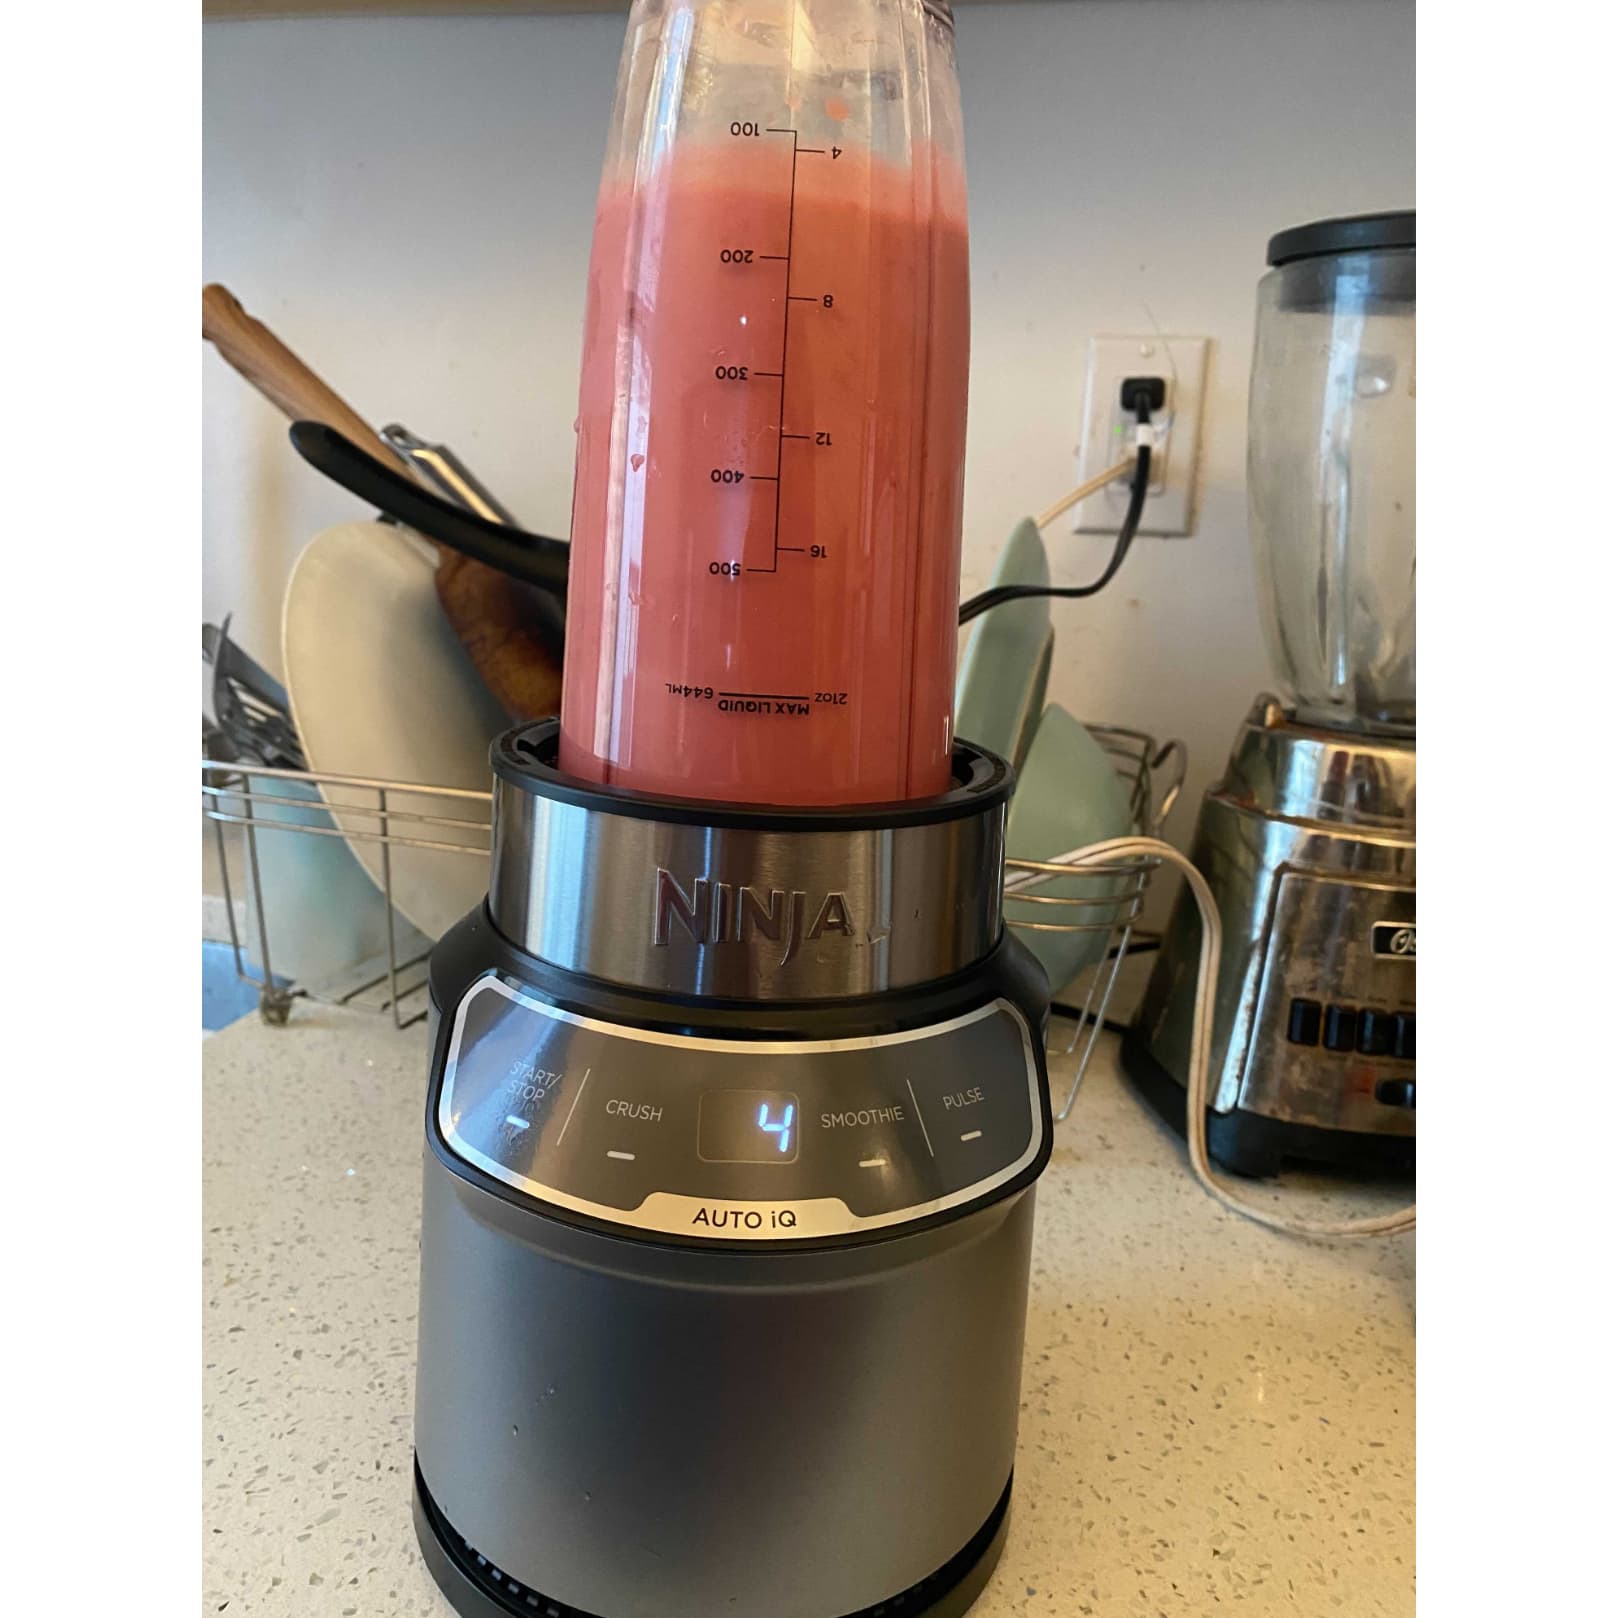 Why I Love the Ninja Nutri Pro Blender: It's Compact and Powerful